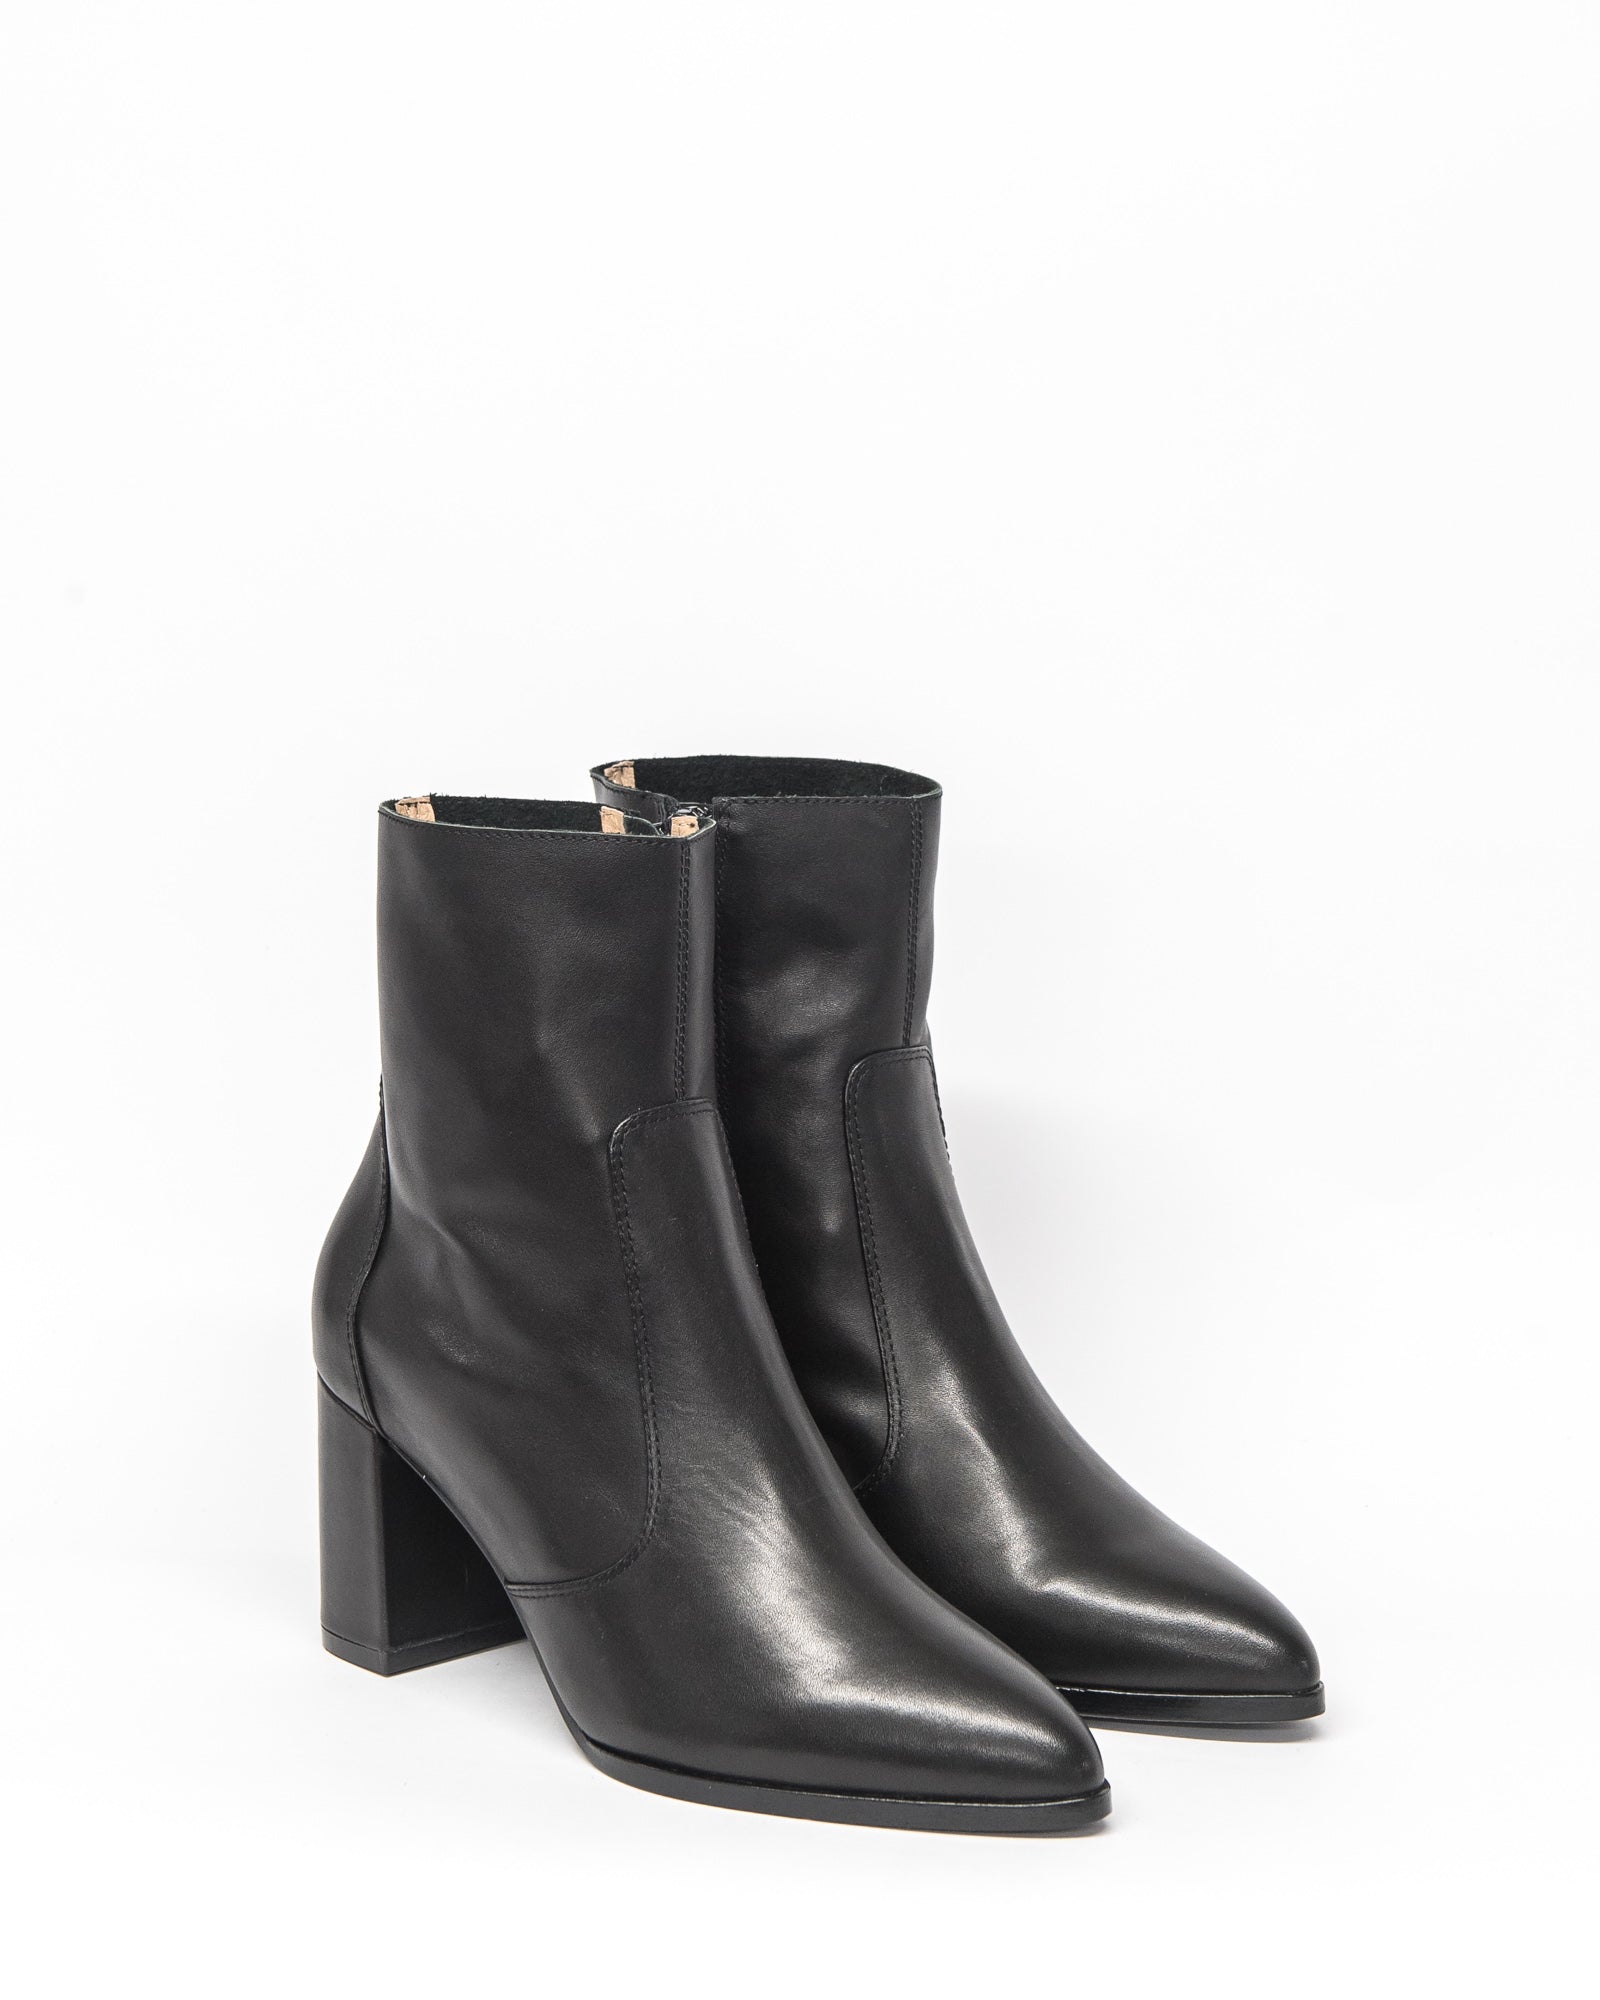 lodge boot - black leather